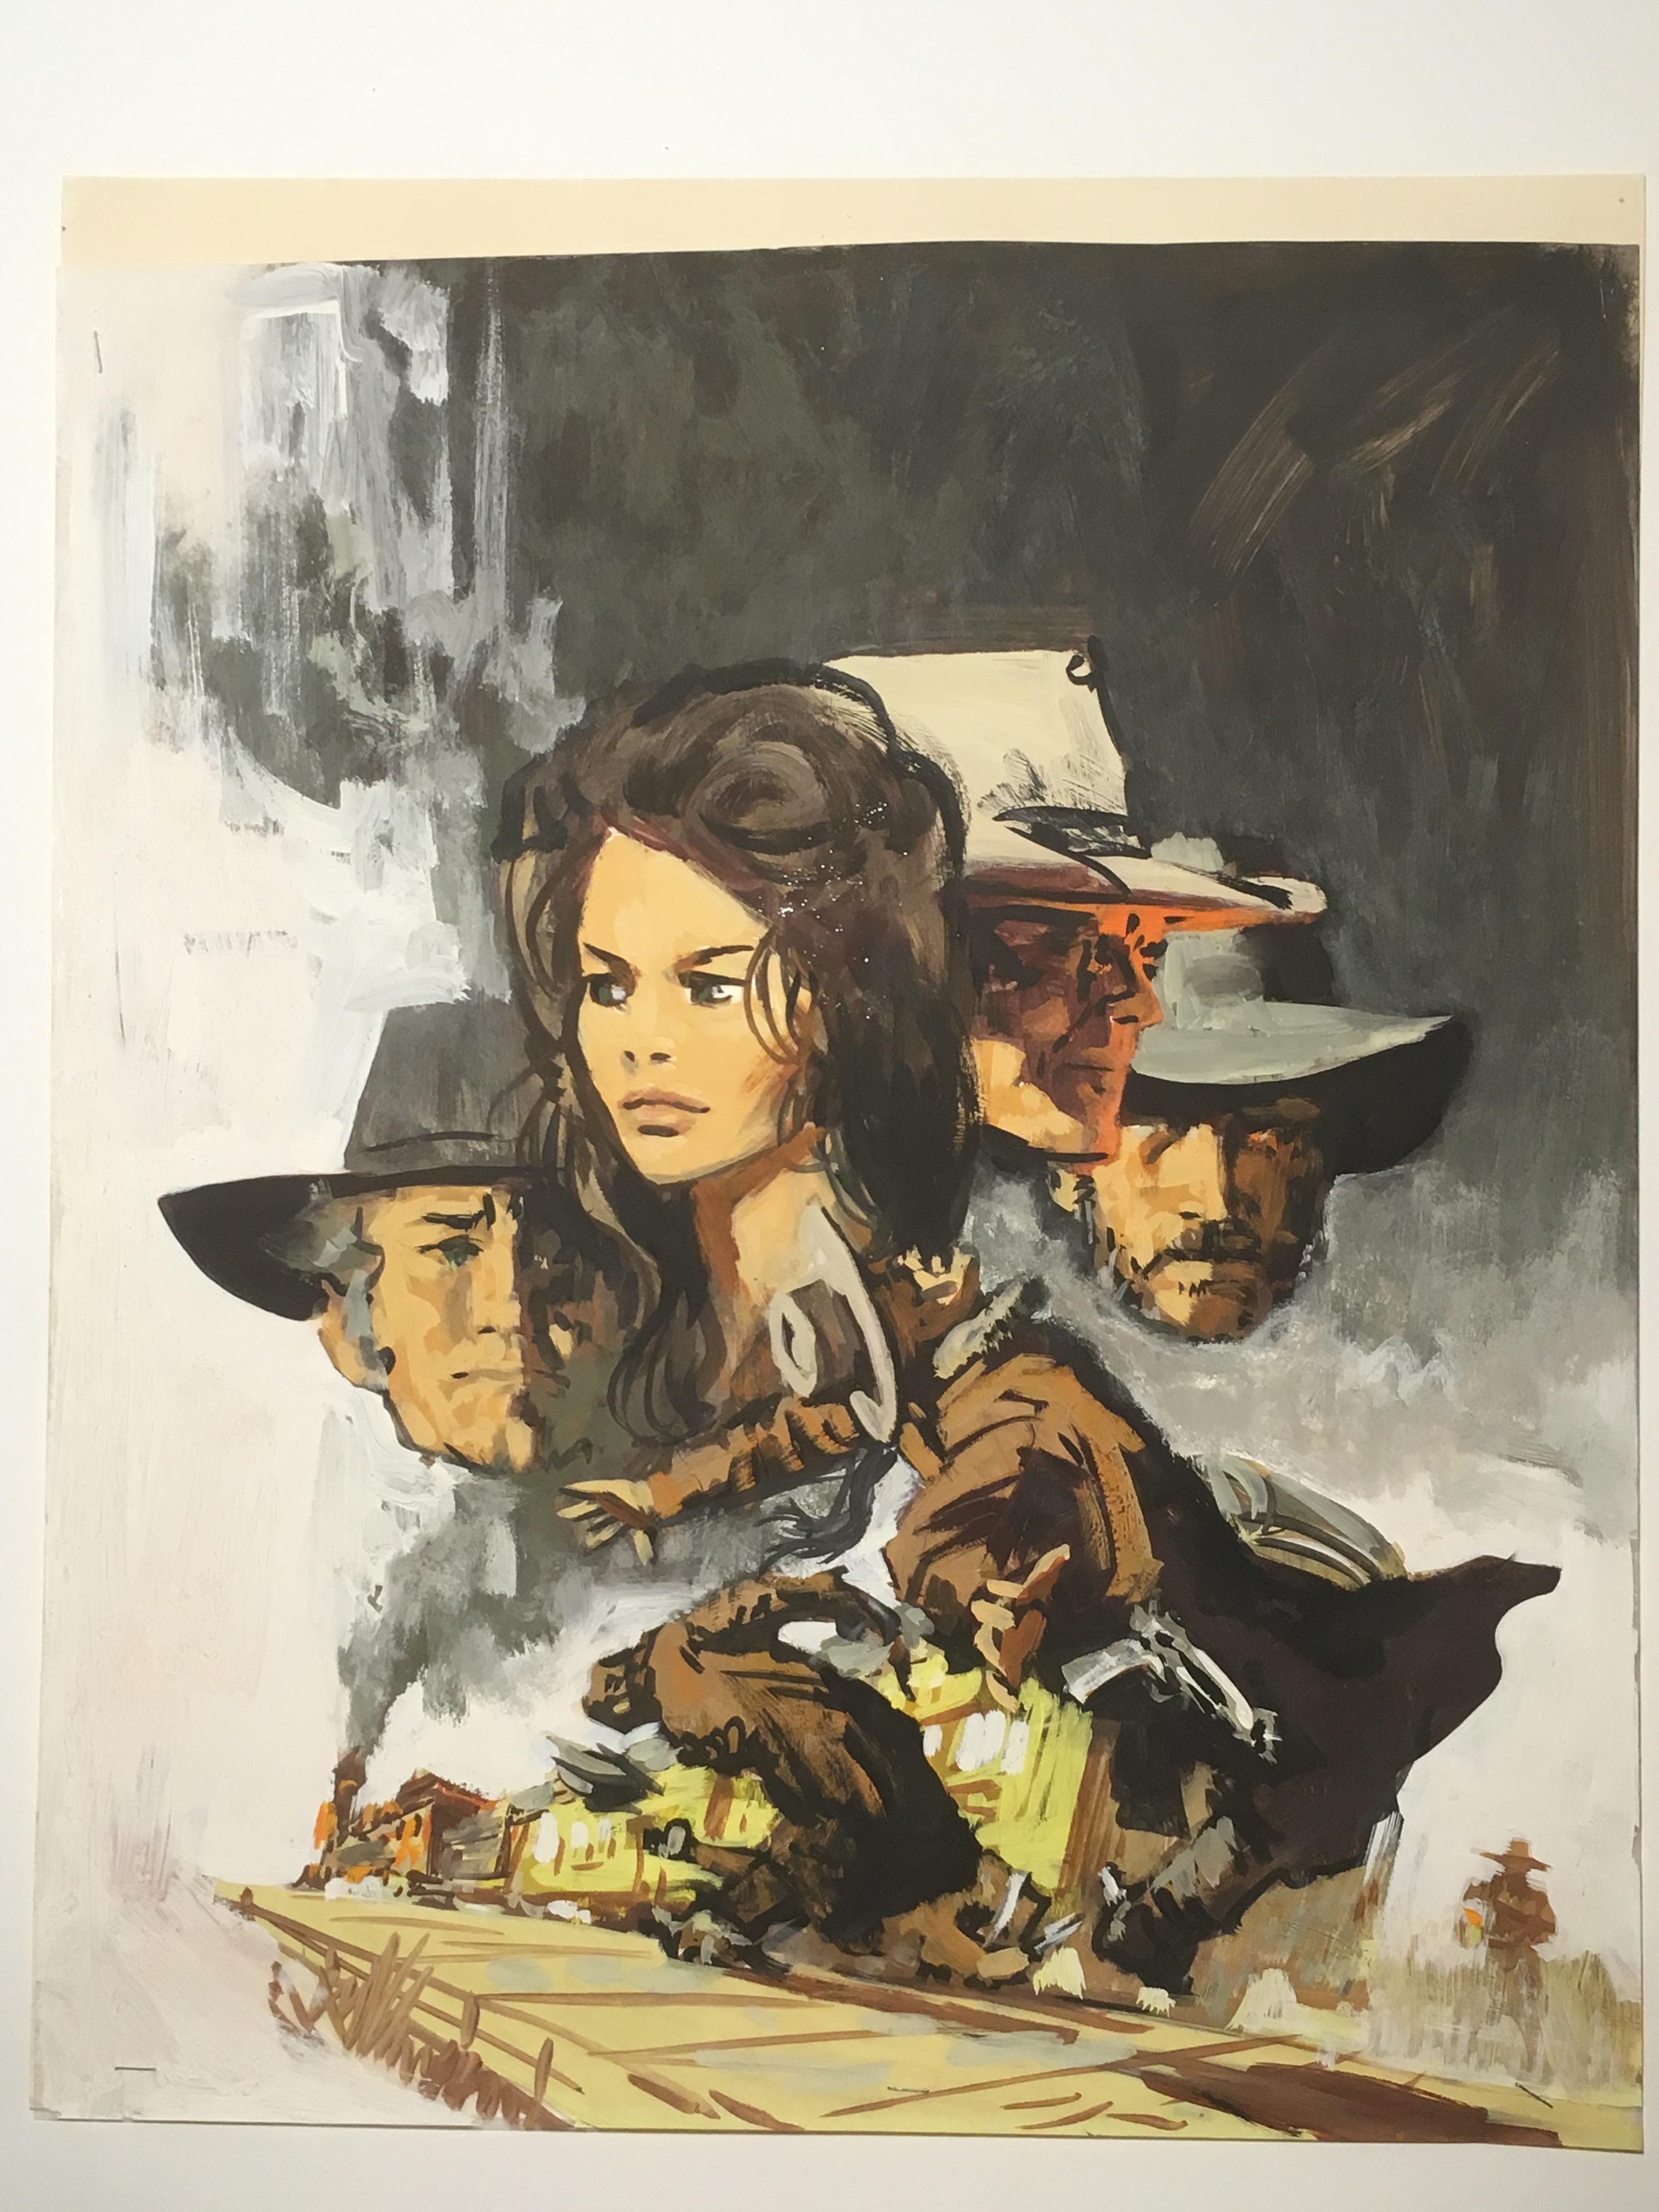 Once Upon a Time in the West / C’era una volta il West (Sergio Leone, 1968)...